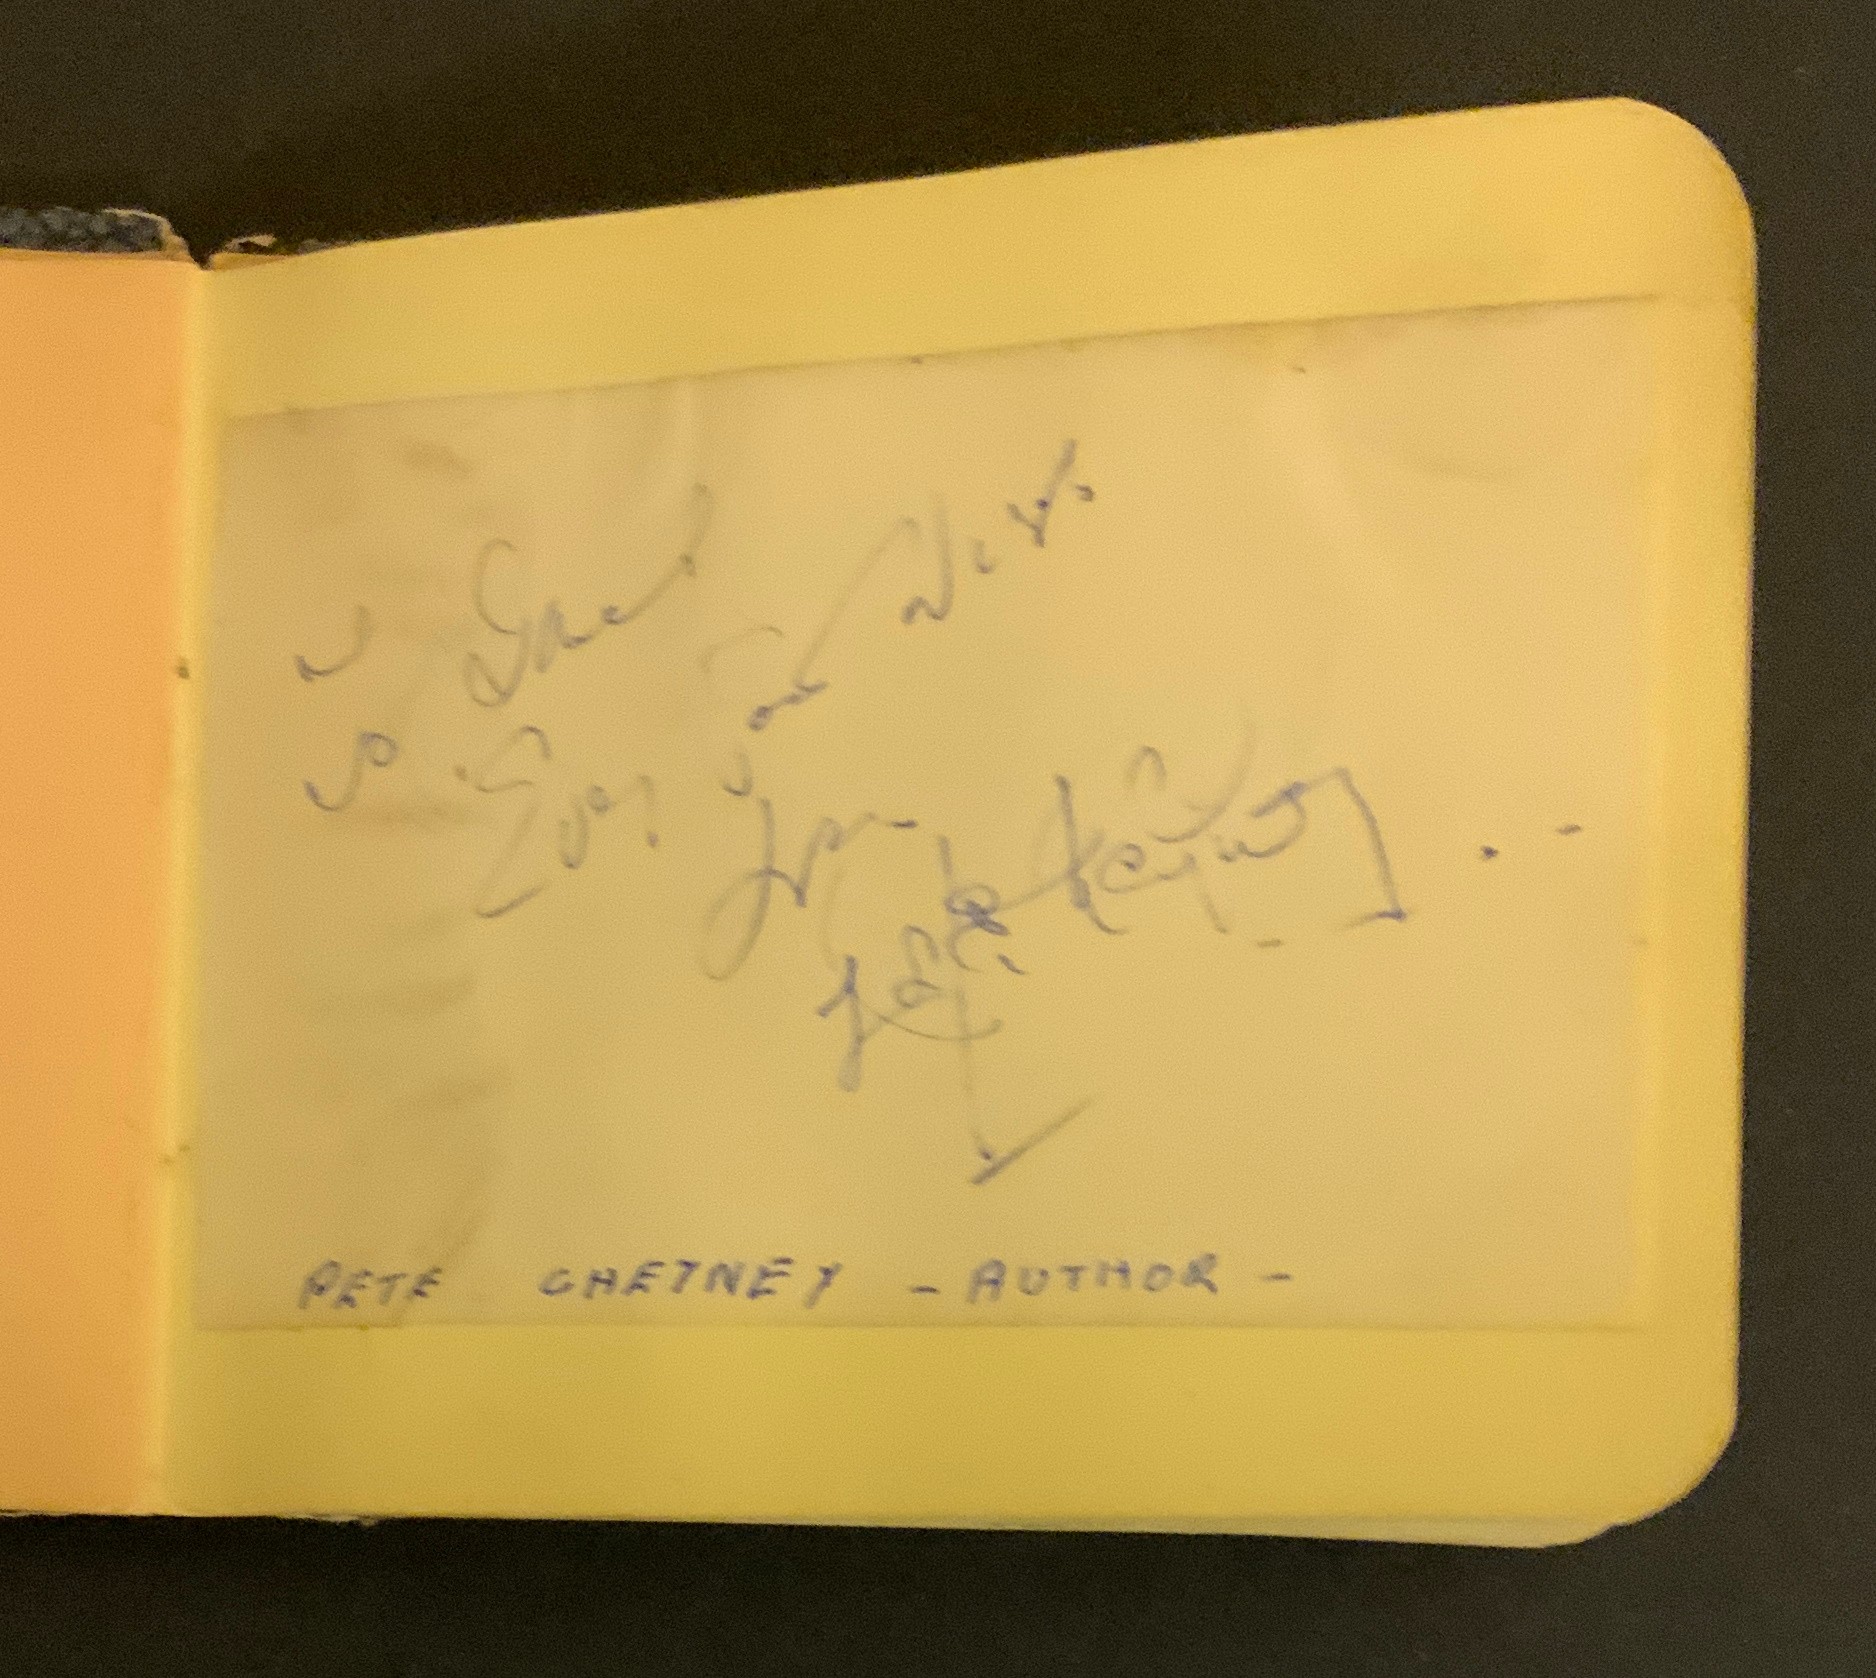 AUTOGRAPH BOOK WITH SIGNATURES - Image 7 of 20